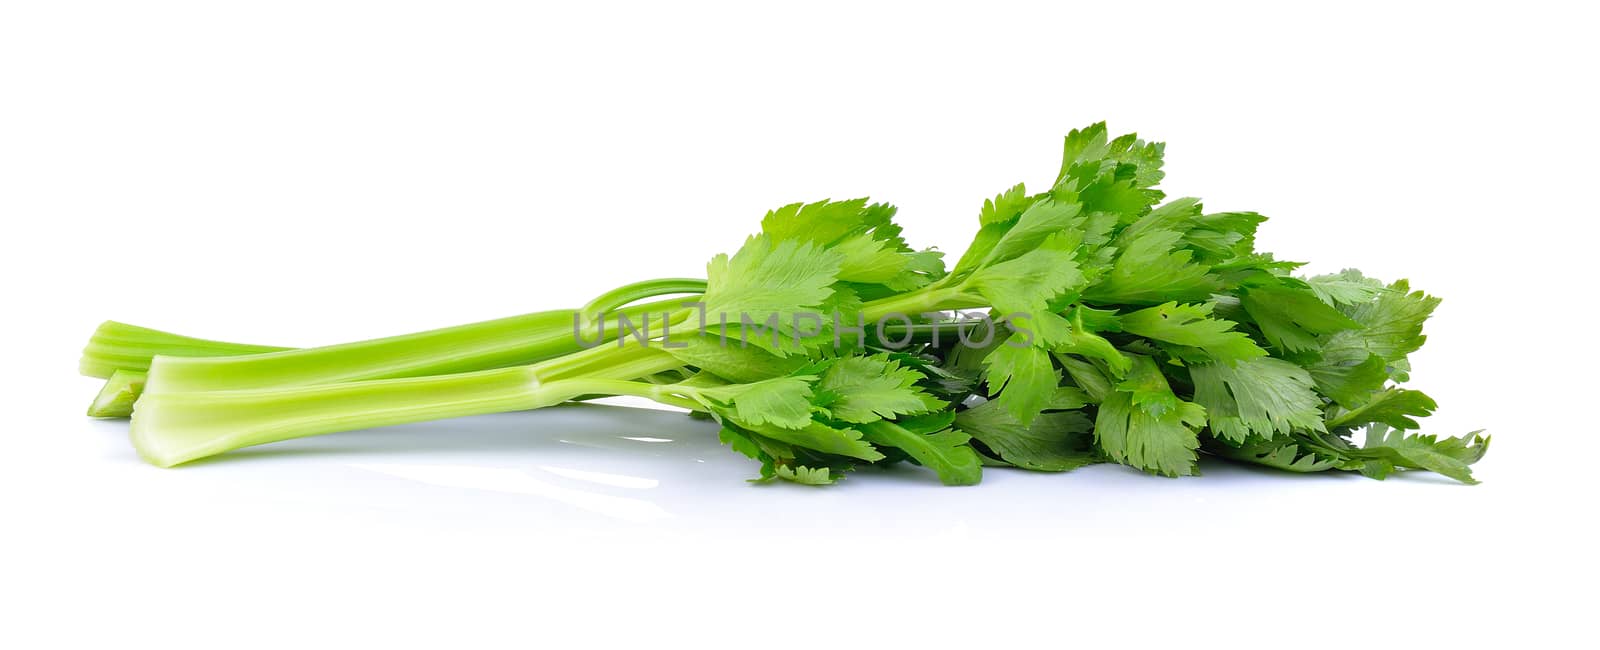 celery on white background by sommai